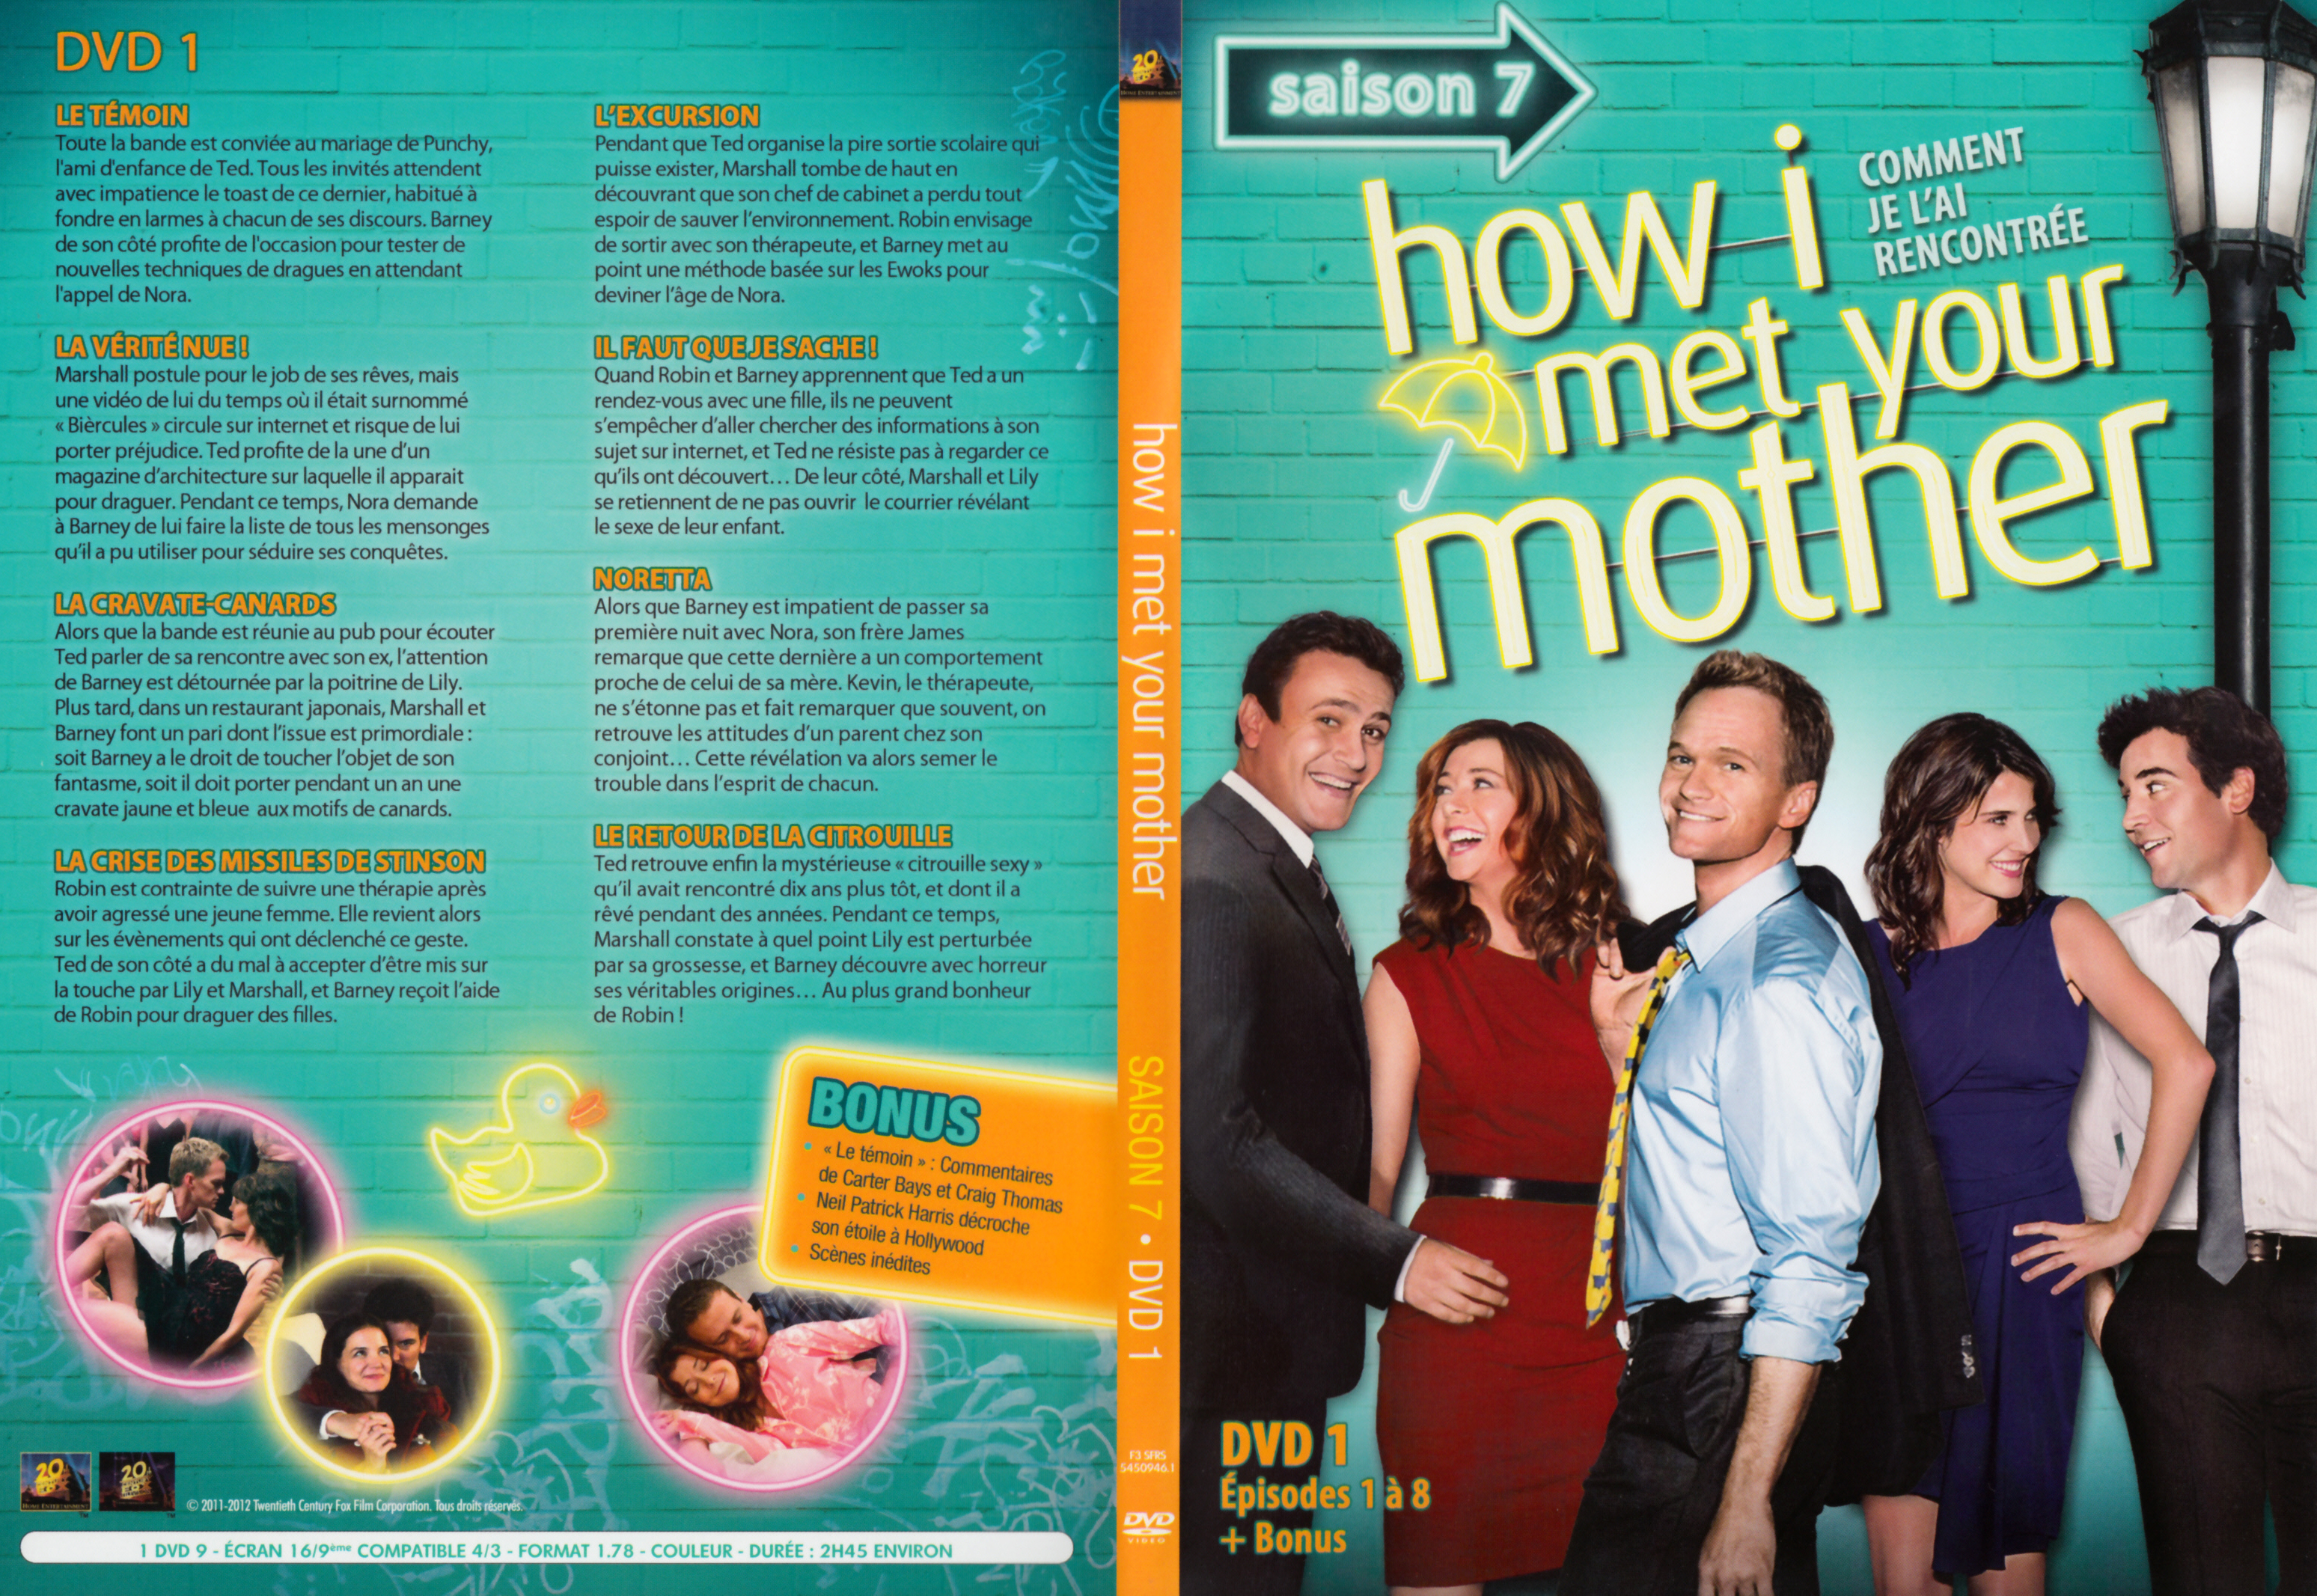 Jaquette DVD How i met your mother Saison 7 DVD 1